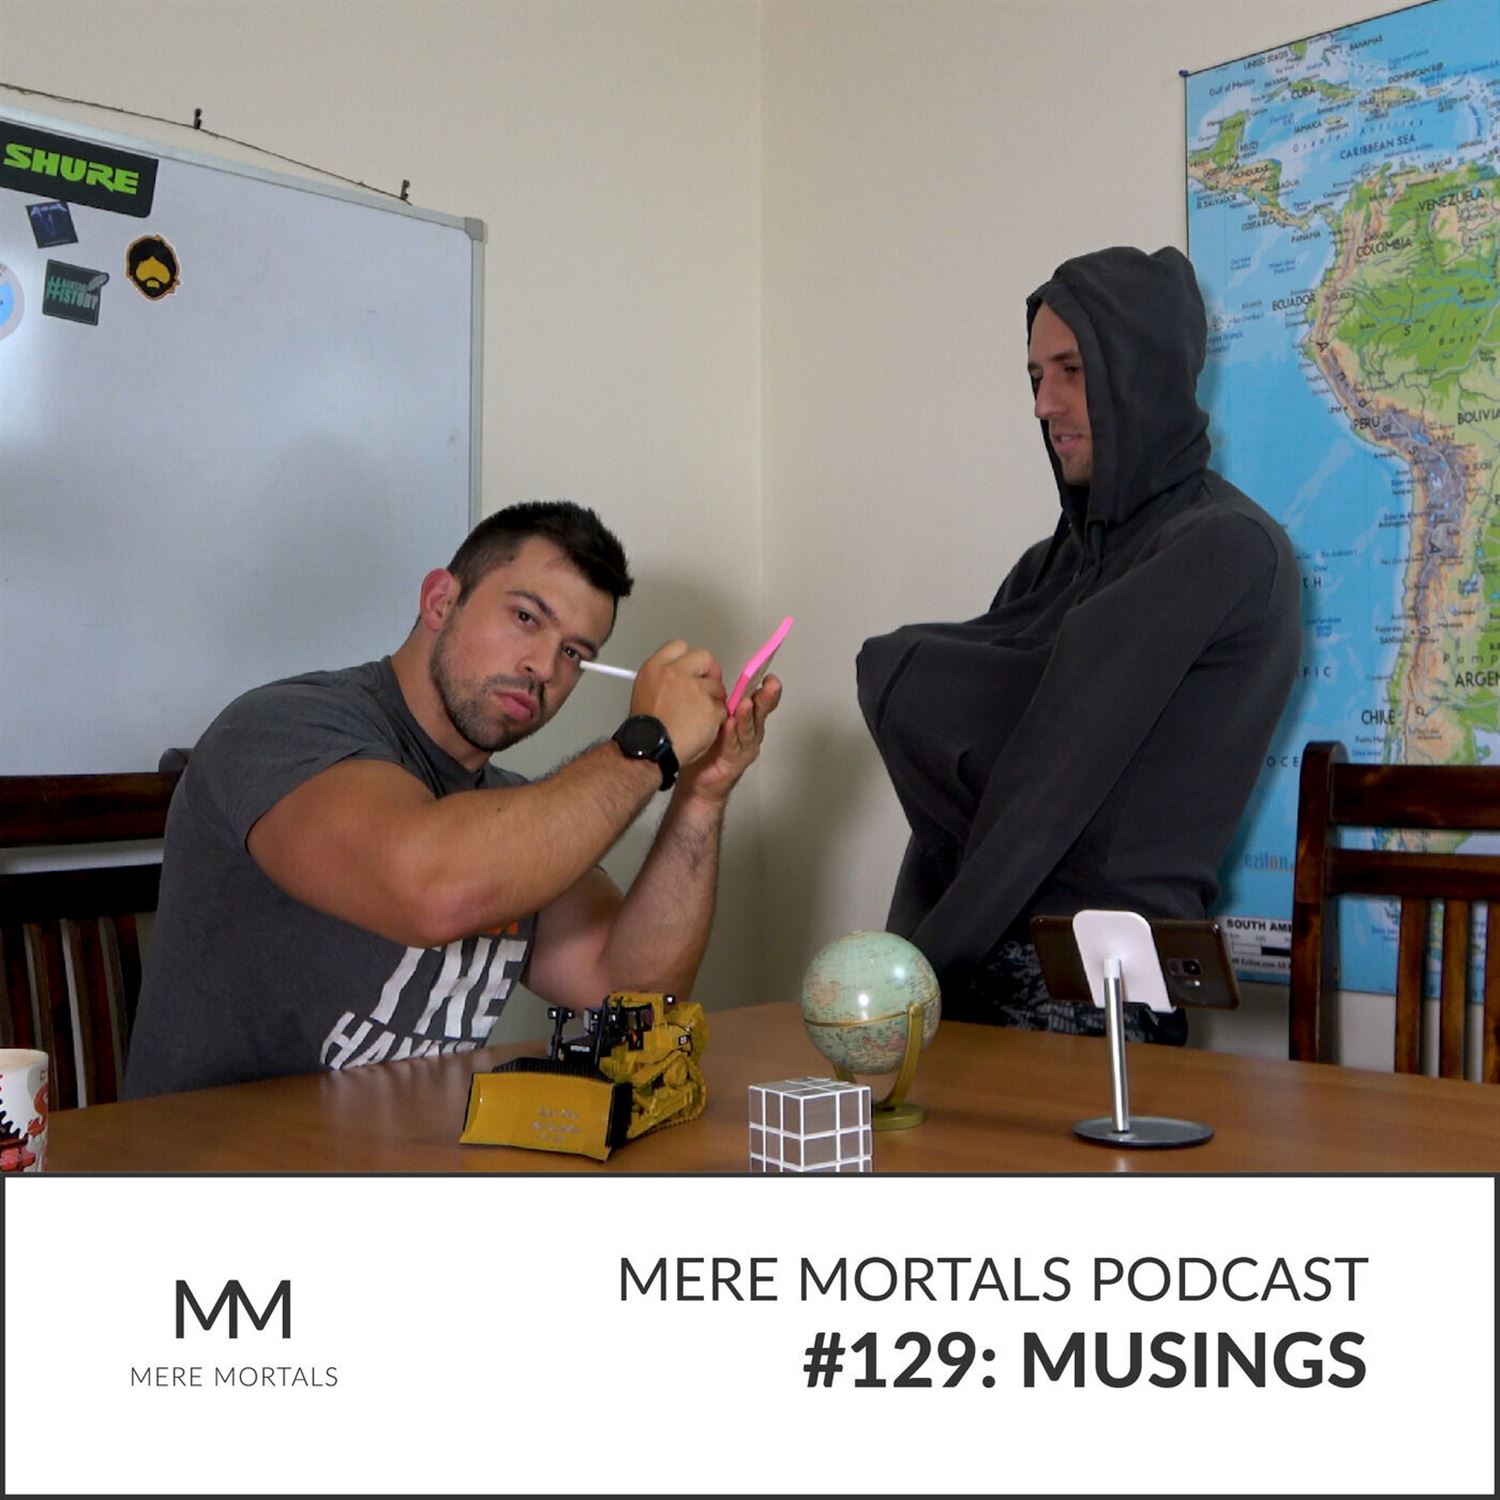 Following Passion Vs Meaning (Episode #129 - Musings)